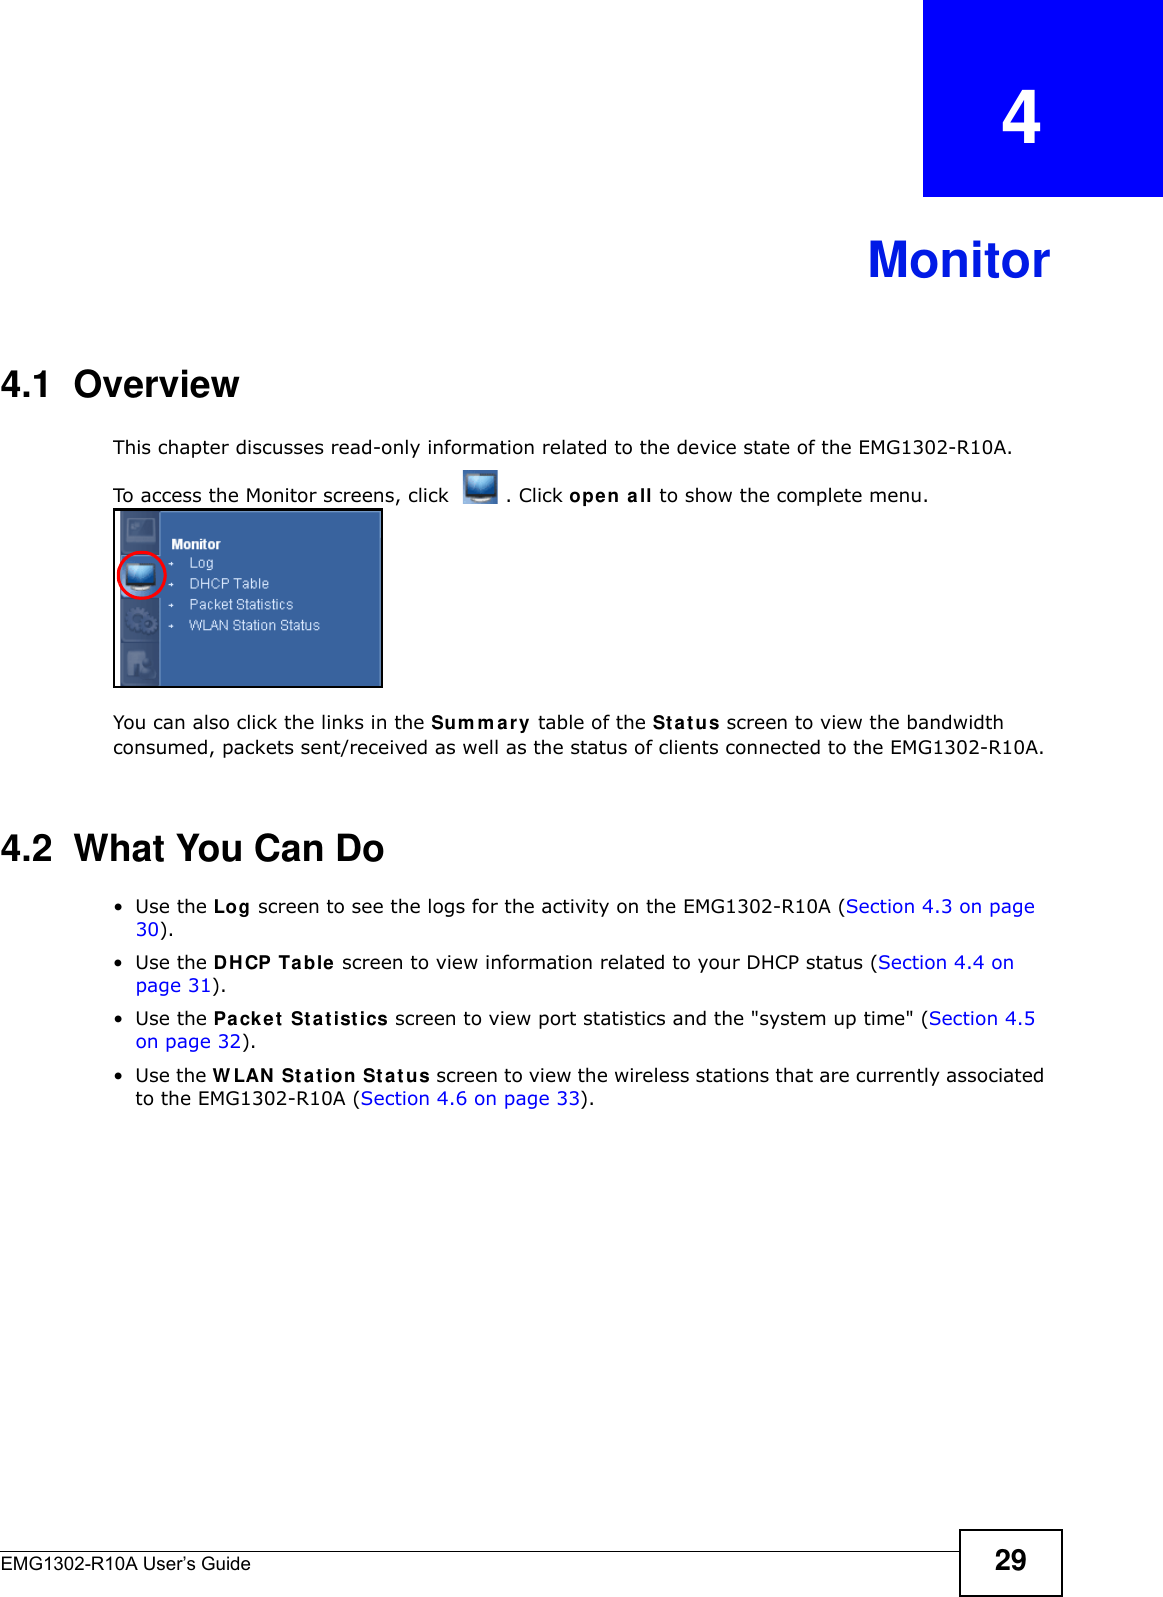 EMG1302-R10A User’s Guide 29CHAPTER   4Monitor4.1  OverviewThis chapter discusses read-only information related to the device state of the EMG1302-R10A. To access the Monitor screens, click  . Click open all to show the complete menu.You can also click the links in the Sum m ary table of the St a t us screen to view the bandwidth consumed, packets sent/received as well as the status of clients connected to the EMG1302-R10A.4.2  What You Can Do•Use the Log screen to see the logs for the activity on the EMG1302-R10A (Section 4.3 on page 30).•Use the DHCP Table screen to view information related to your DHCP status (Section 4.4 on page 31).•Use the Pa ck e t  St a t ist ics screen to view port statistics and the &quot;system up time&quot; (Section 4.5 on page 32).•Use the W LAN  St at ion Sta t u s screen to view the wireless stations that are currently associated to the EMG1302-R10A (Section 4.6 on page 33).